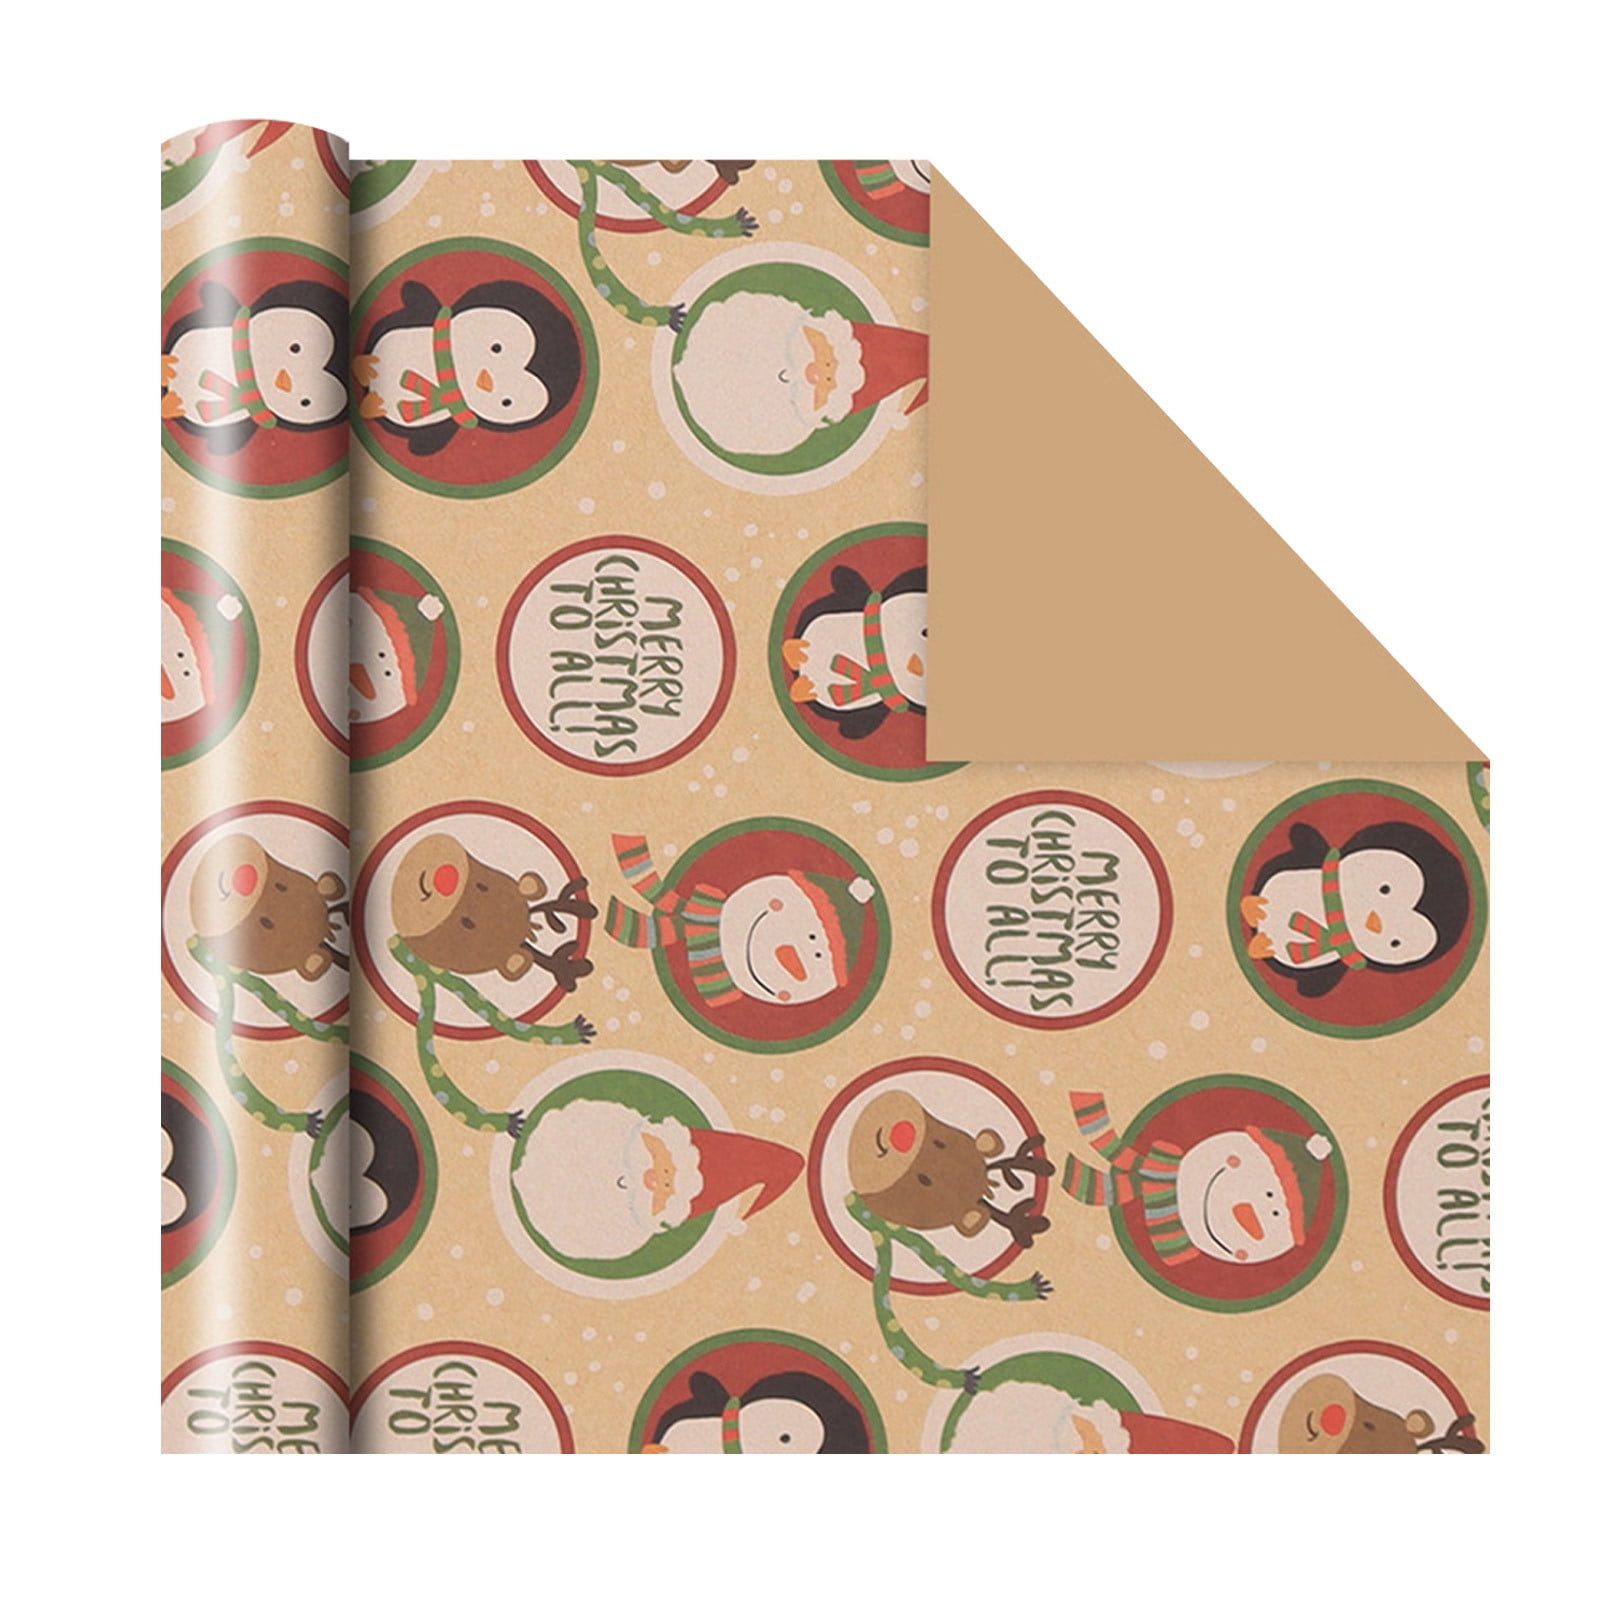 FAHXNVB Christmas Wrapping Paper Brown Kraft Paper with Christmas Elements Print Paper Christmas Gift Paper Gift Paper Vintage Floral Paper Kraft Paper